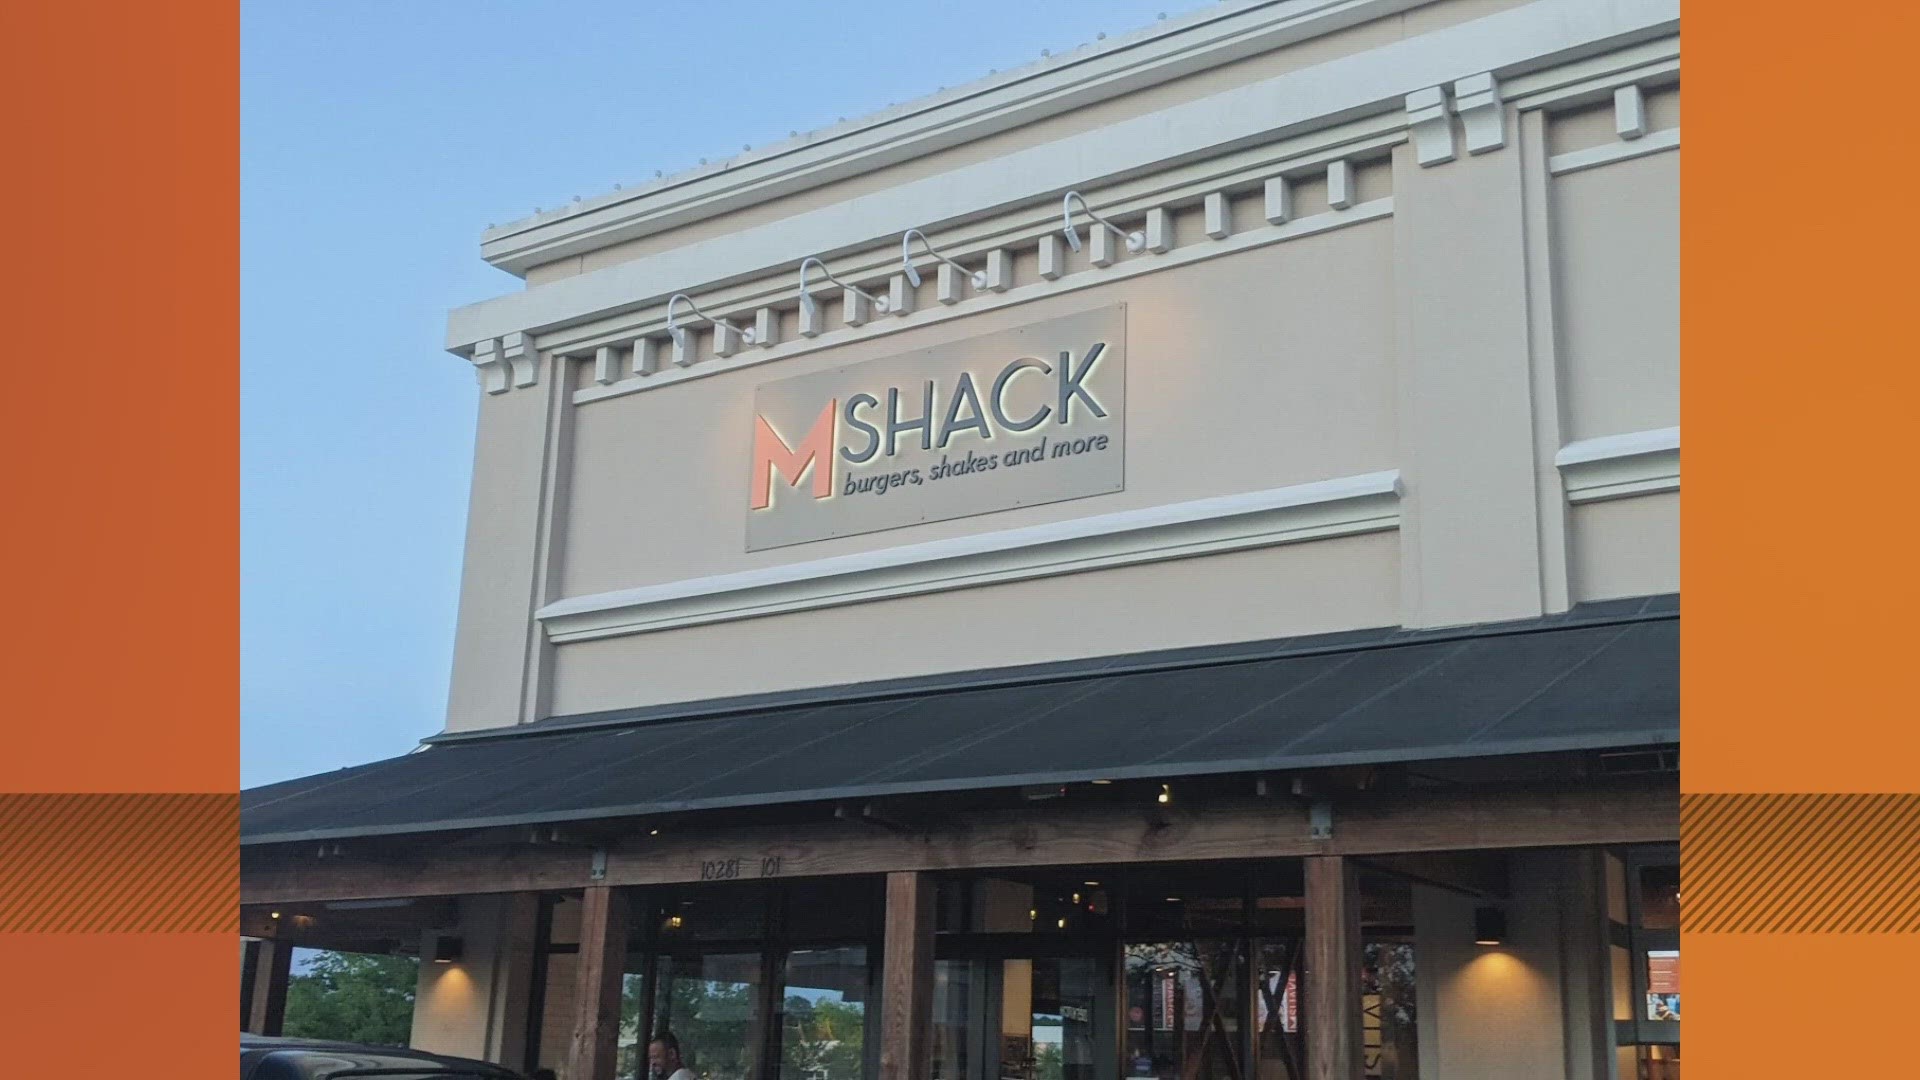 The Town Center restaurant is the third M Shack location to close in recent years.